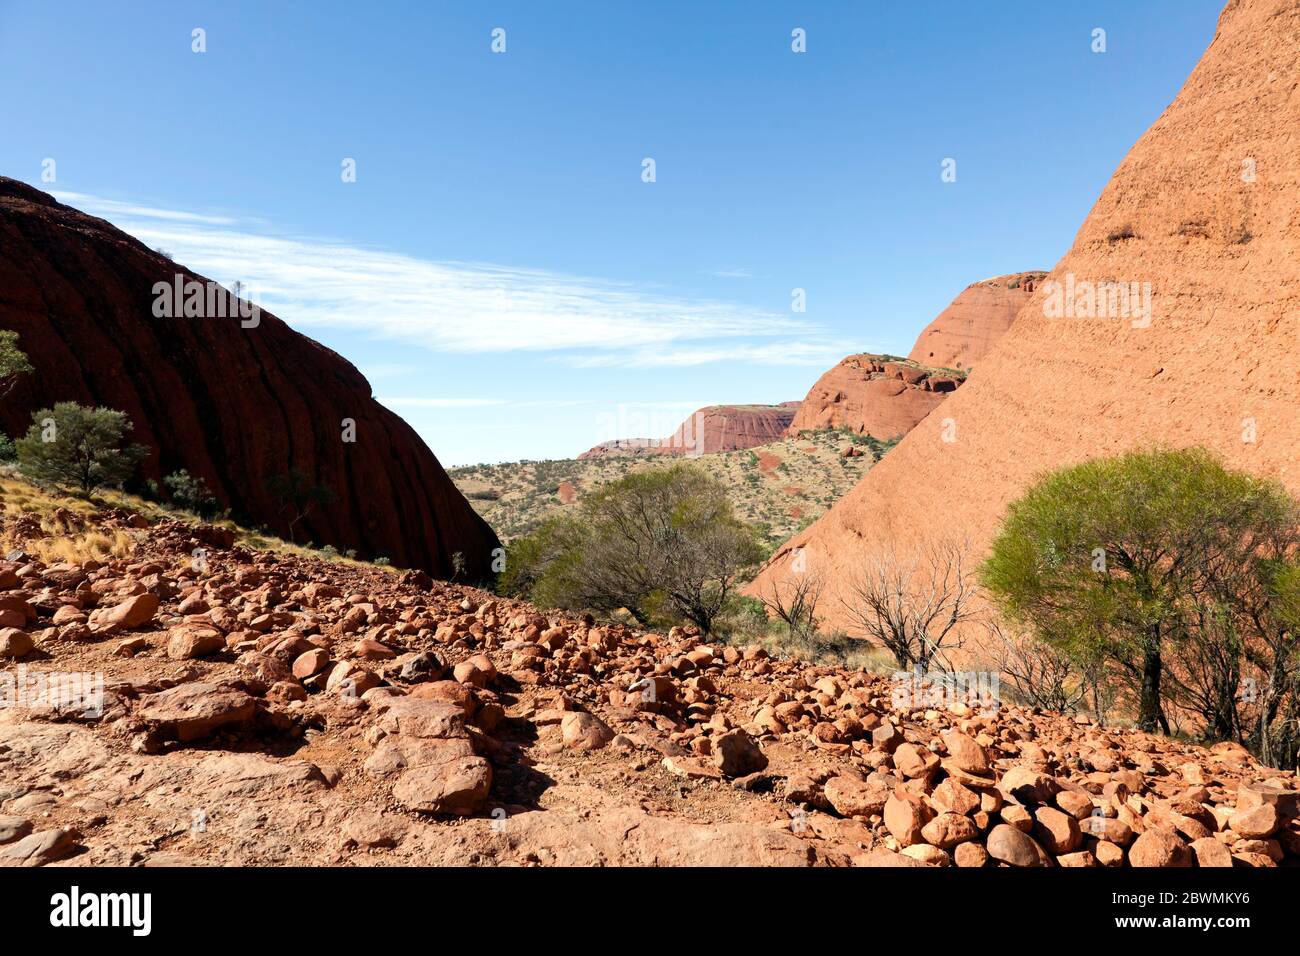 View of a section of the Valley of the winds at Kata Tjuṯa, in the Uluru-Kata Tjuṯa National Park, Northern Territory, Australia Stock Photo